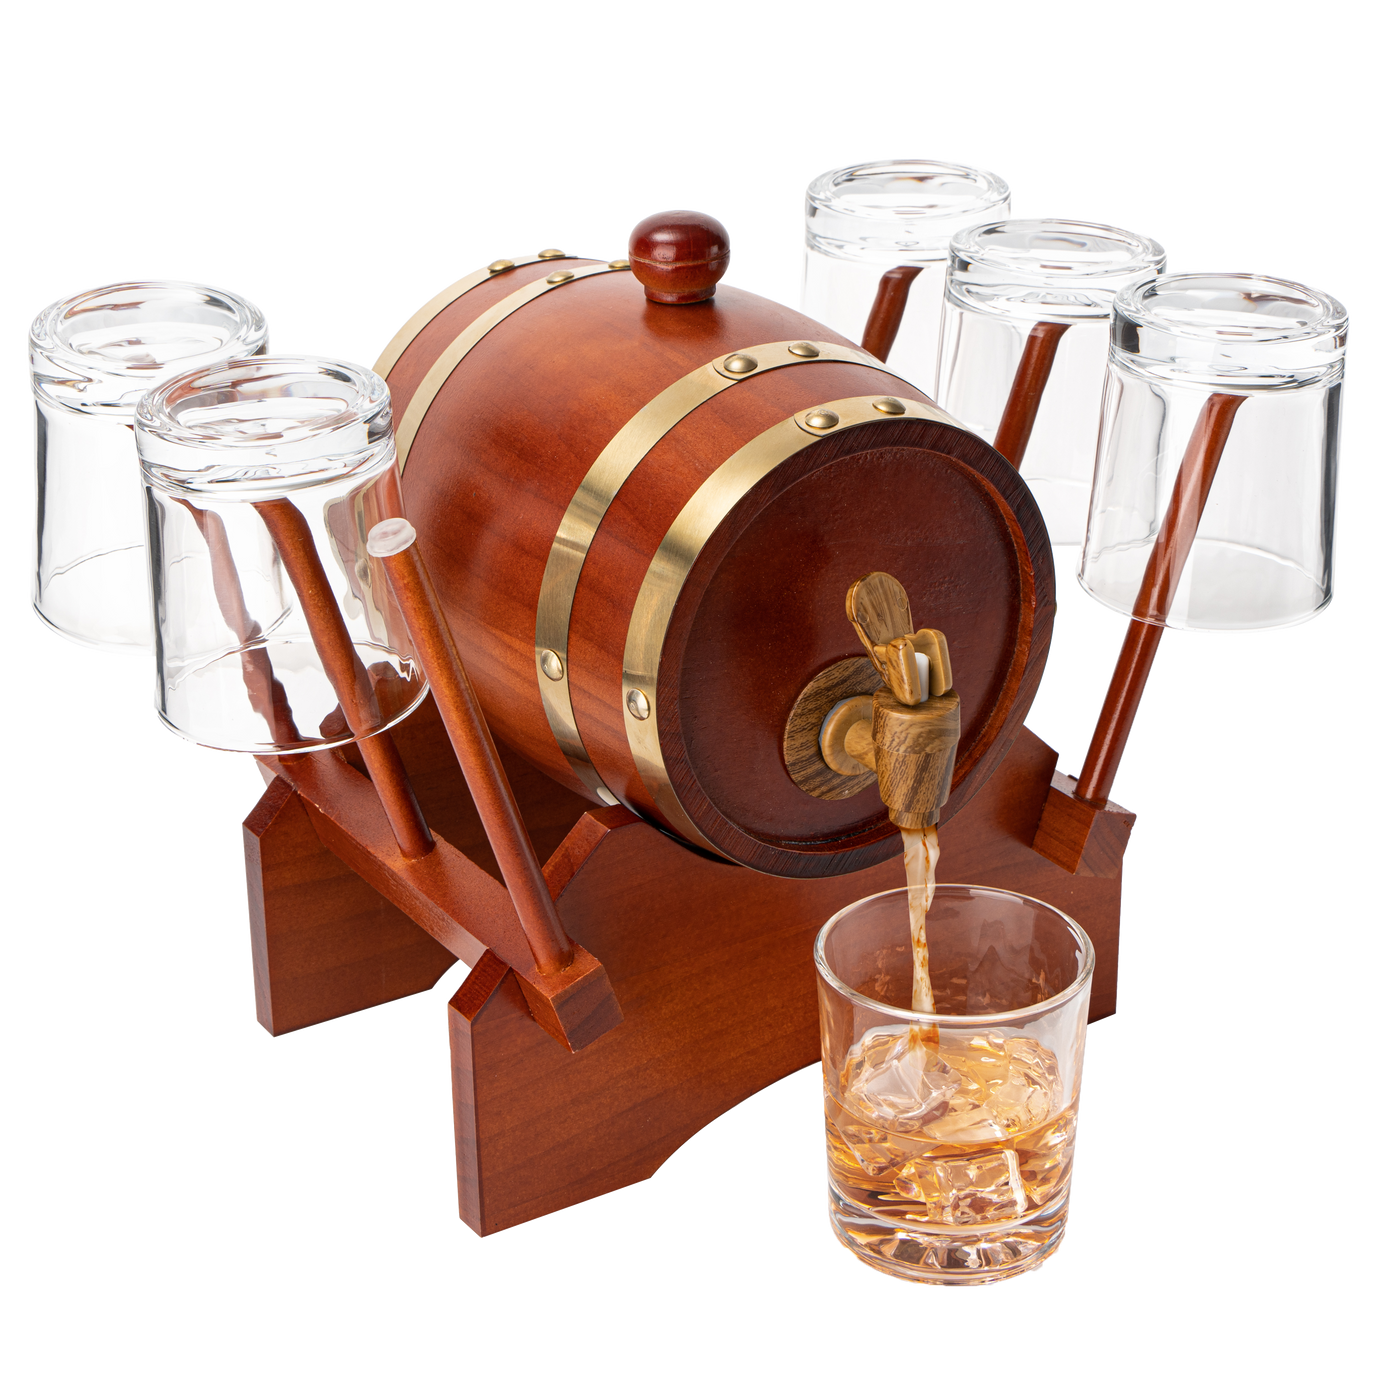 Barrel Decanter with 6 Whiskey Glasses by Liquor Lux - 1000 mL Mahogany Wood Old Fashioned Classic Whiskey Decanter Set, Gifts for Him, Father's Day, Gift Ideas